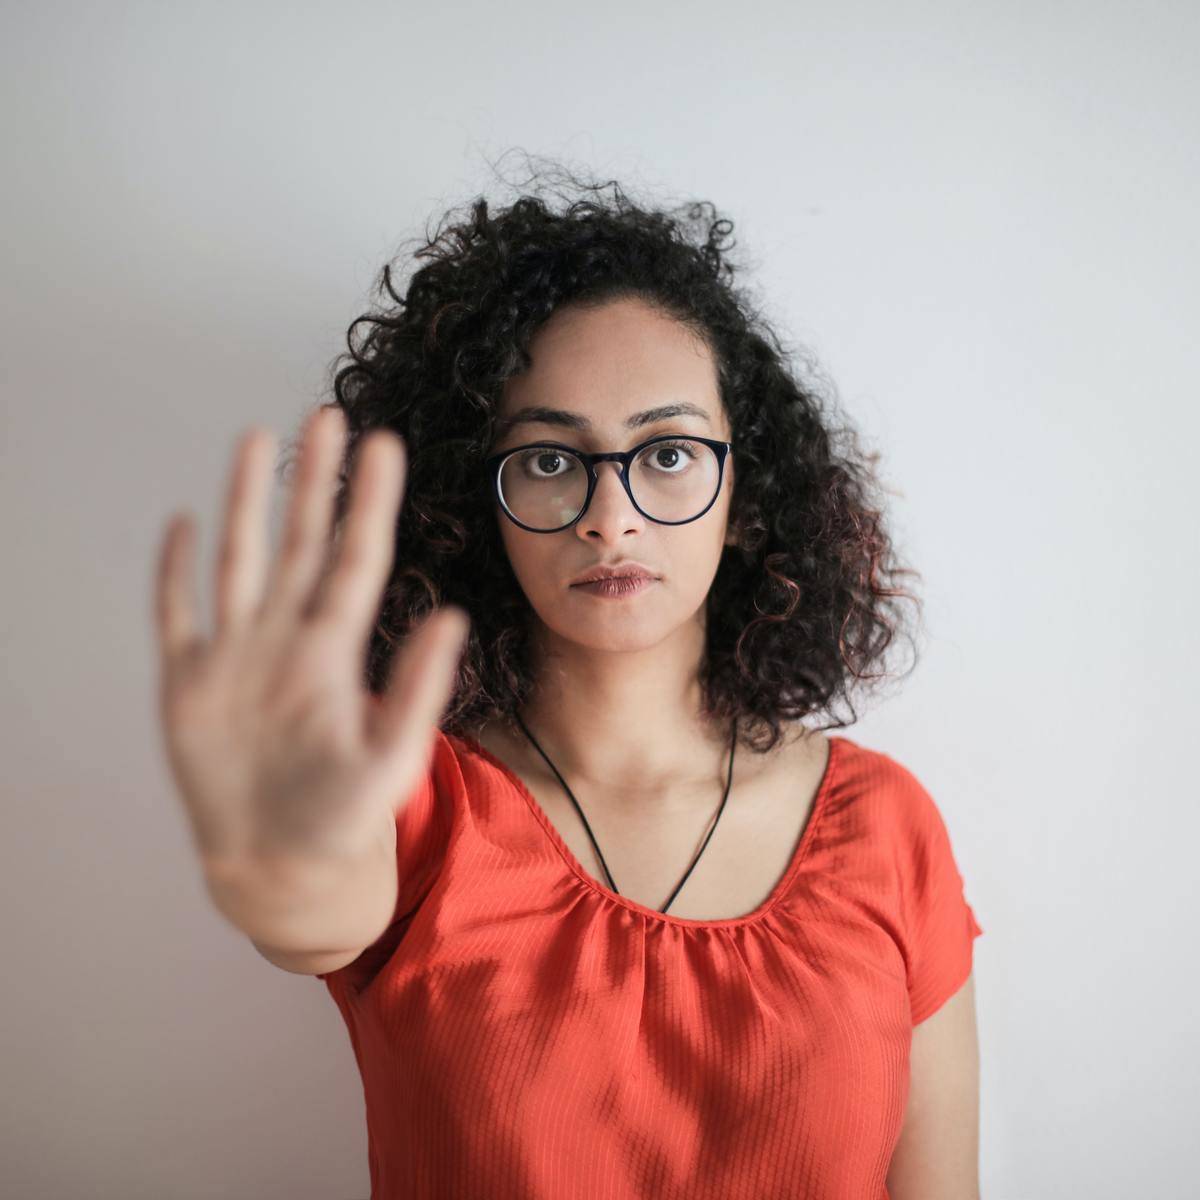 portrait-photo-of-woman-in-red-top-wearing-black-framed-eyeglasses-holding-out-her-hand-in-stop-gesture-